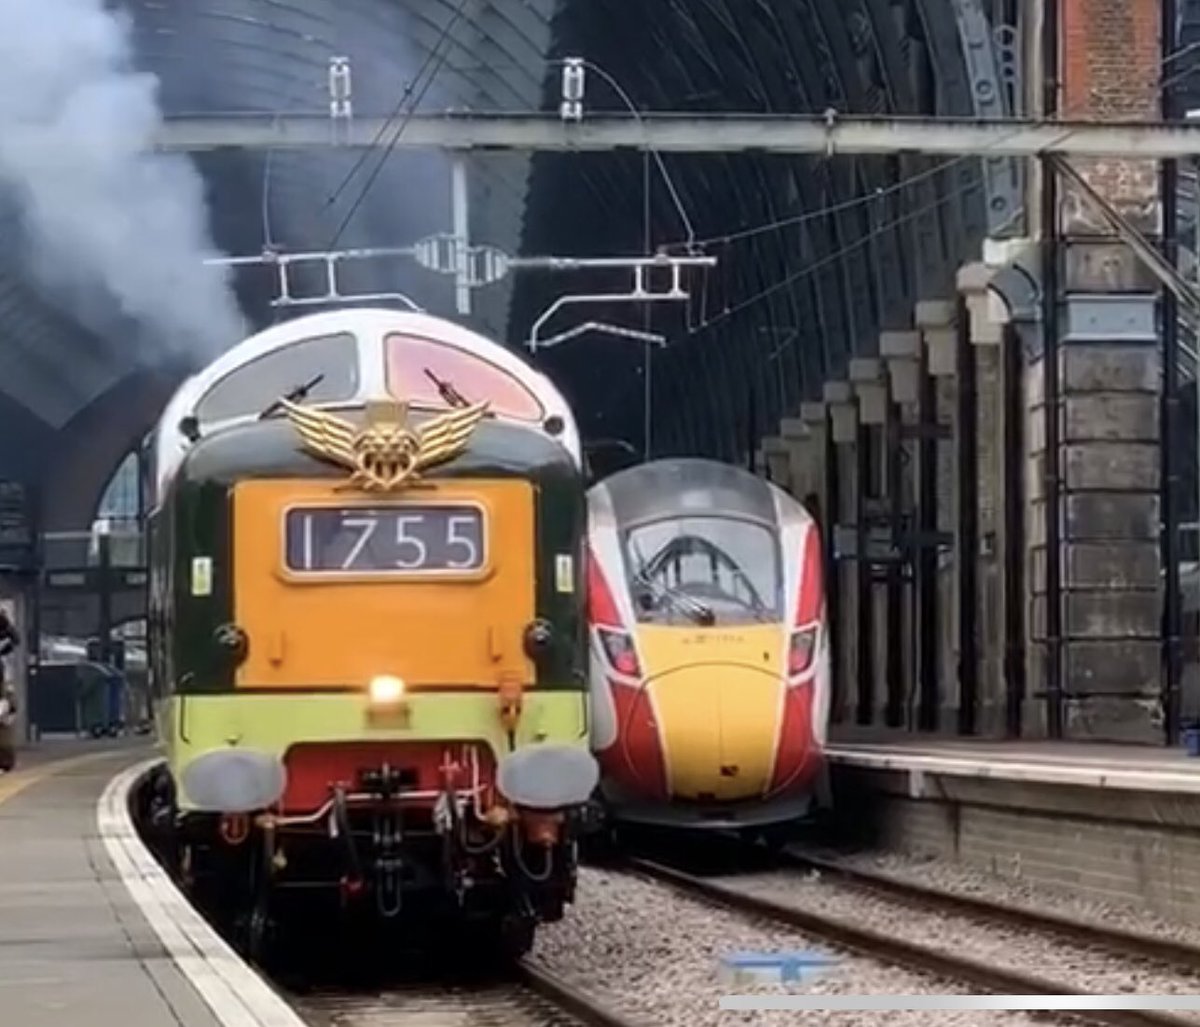 Still buzzing from this amazing occasion. #deltic #class55